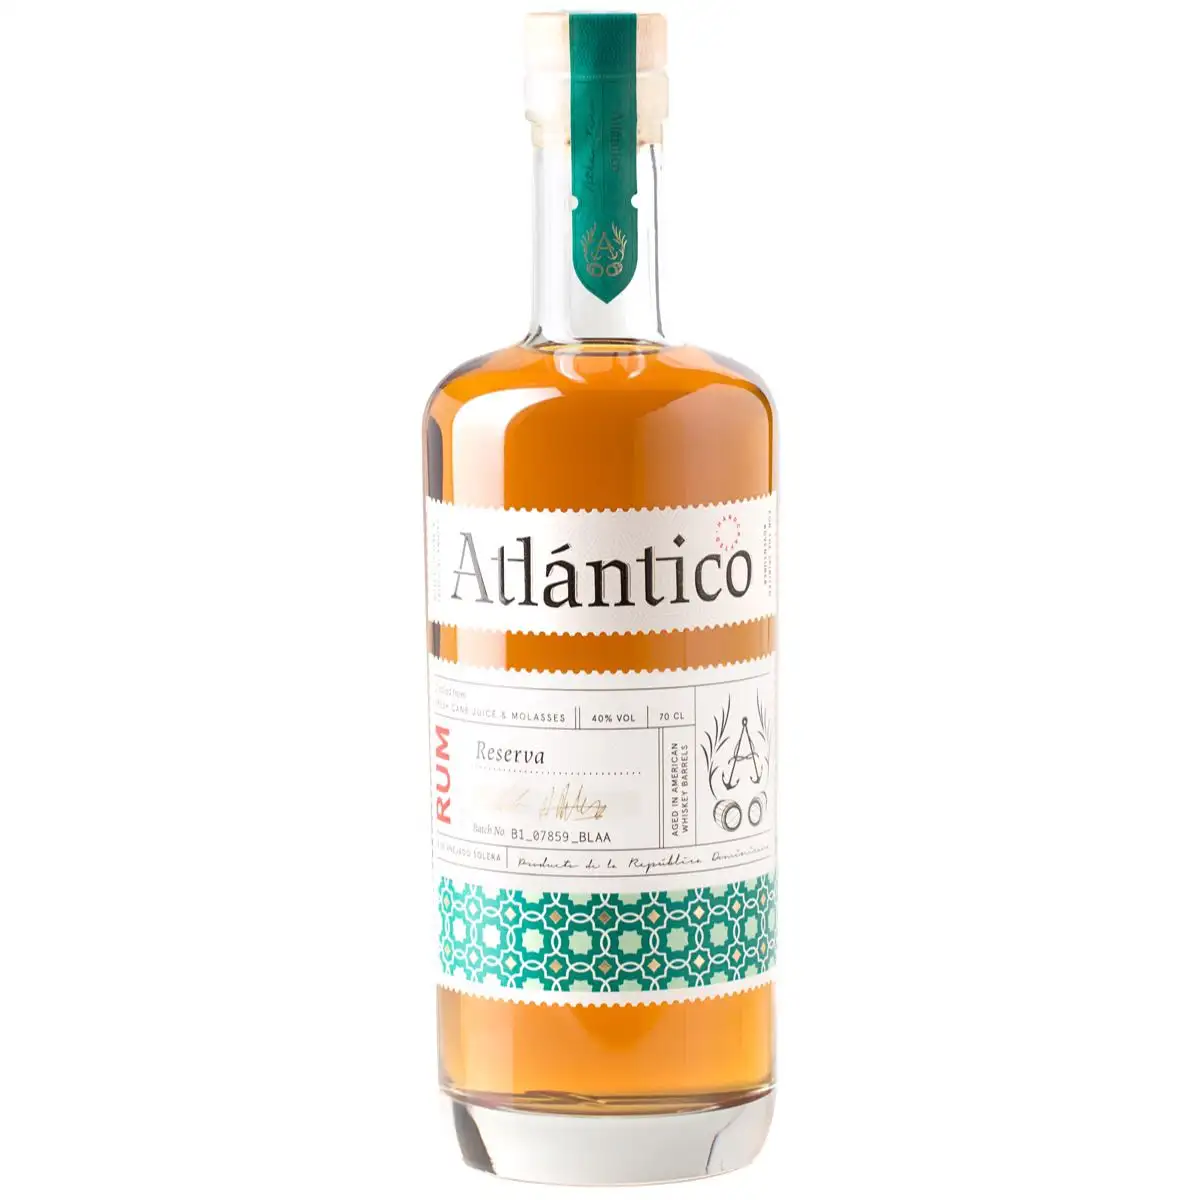 Image of the front of the bottle of the rum Atlantico Reserva